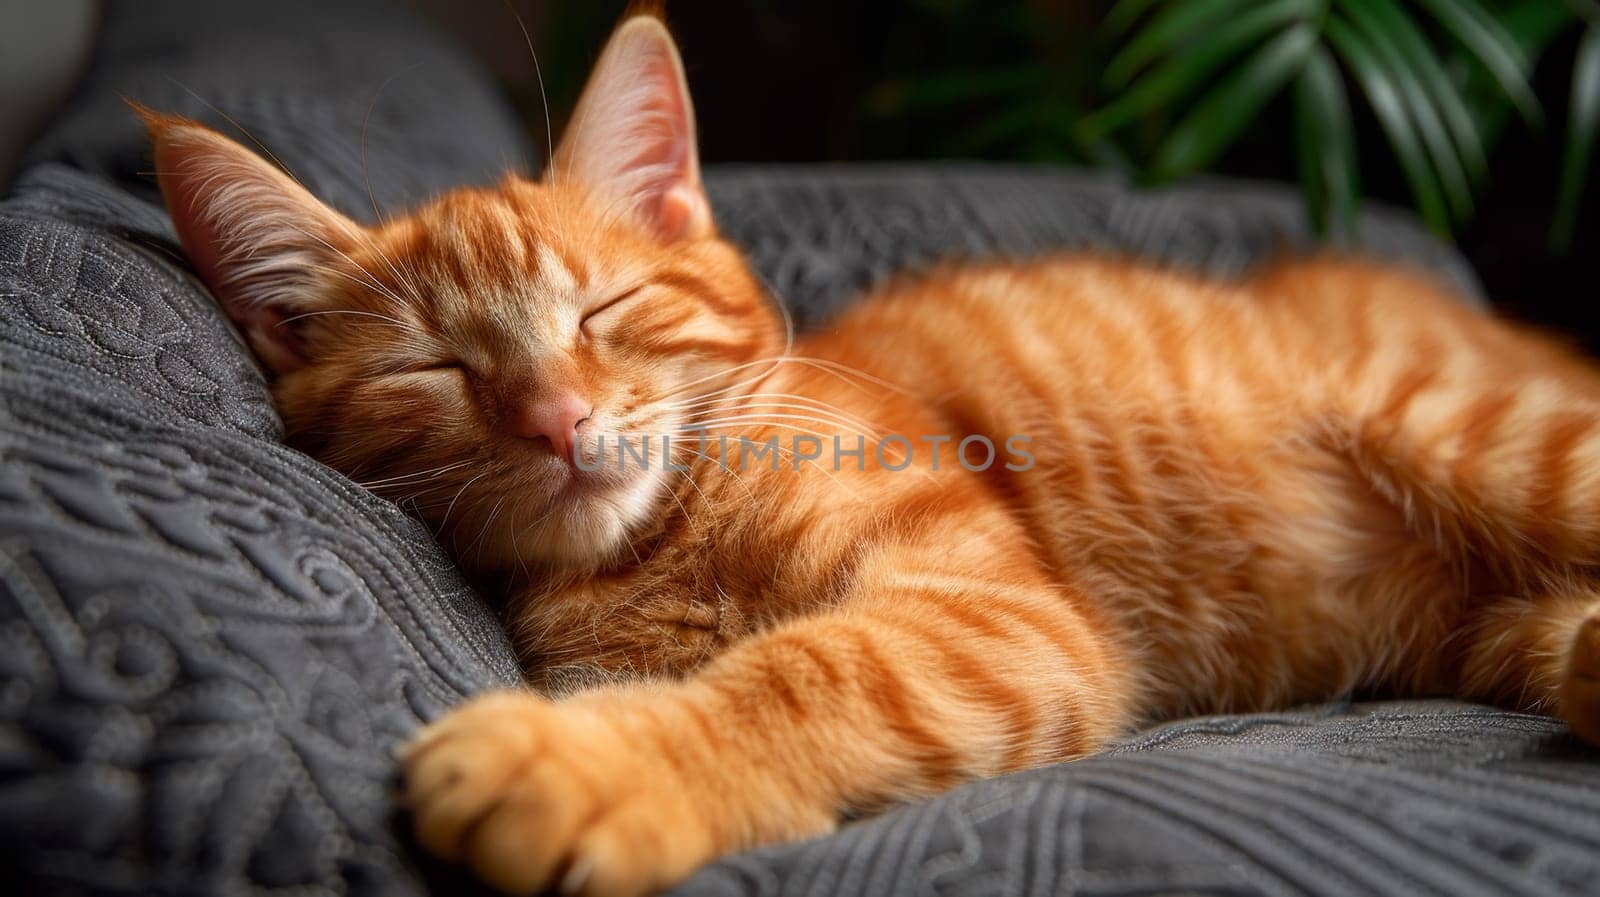 A cat sleeping on a couch with its eyes closed, AI by starush